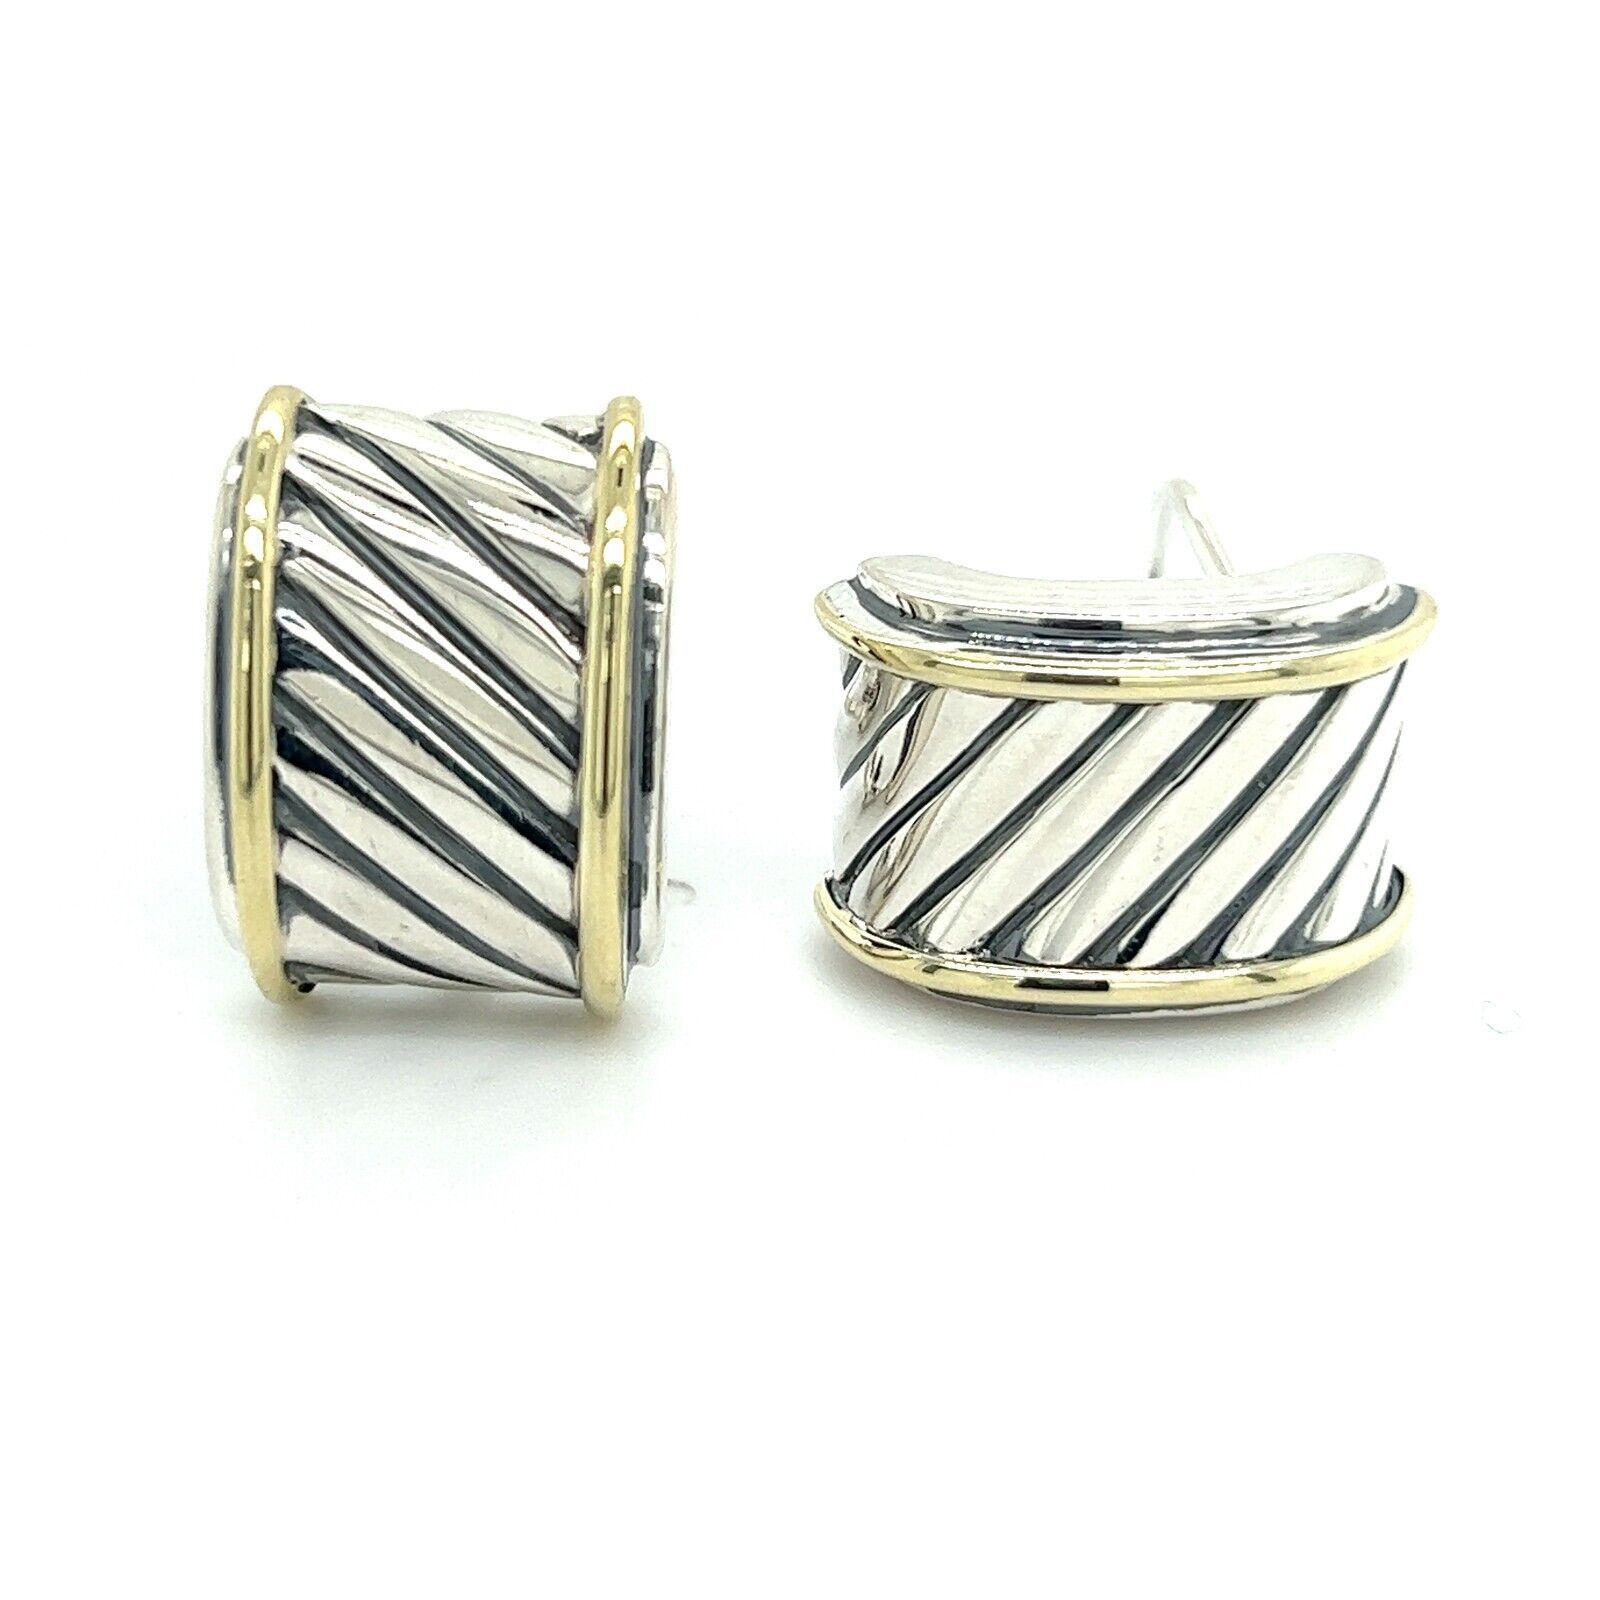 Primary image for David Yurman Authentic Estate Earrings 14k Gold + Silver DY284